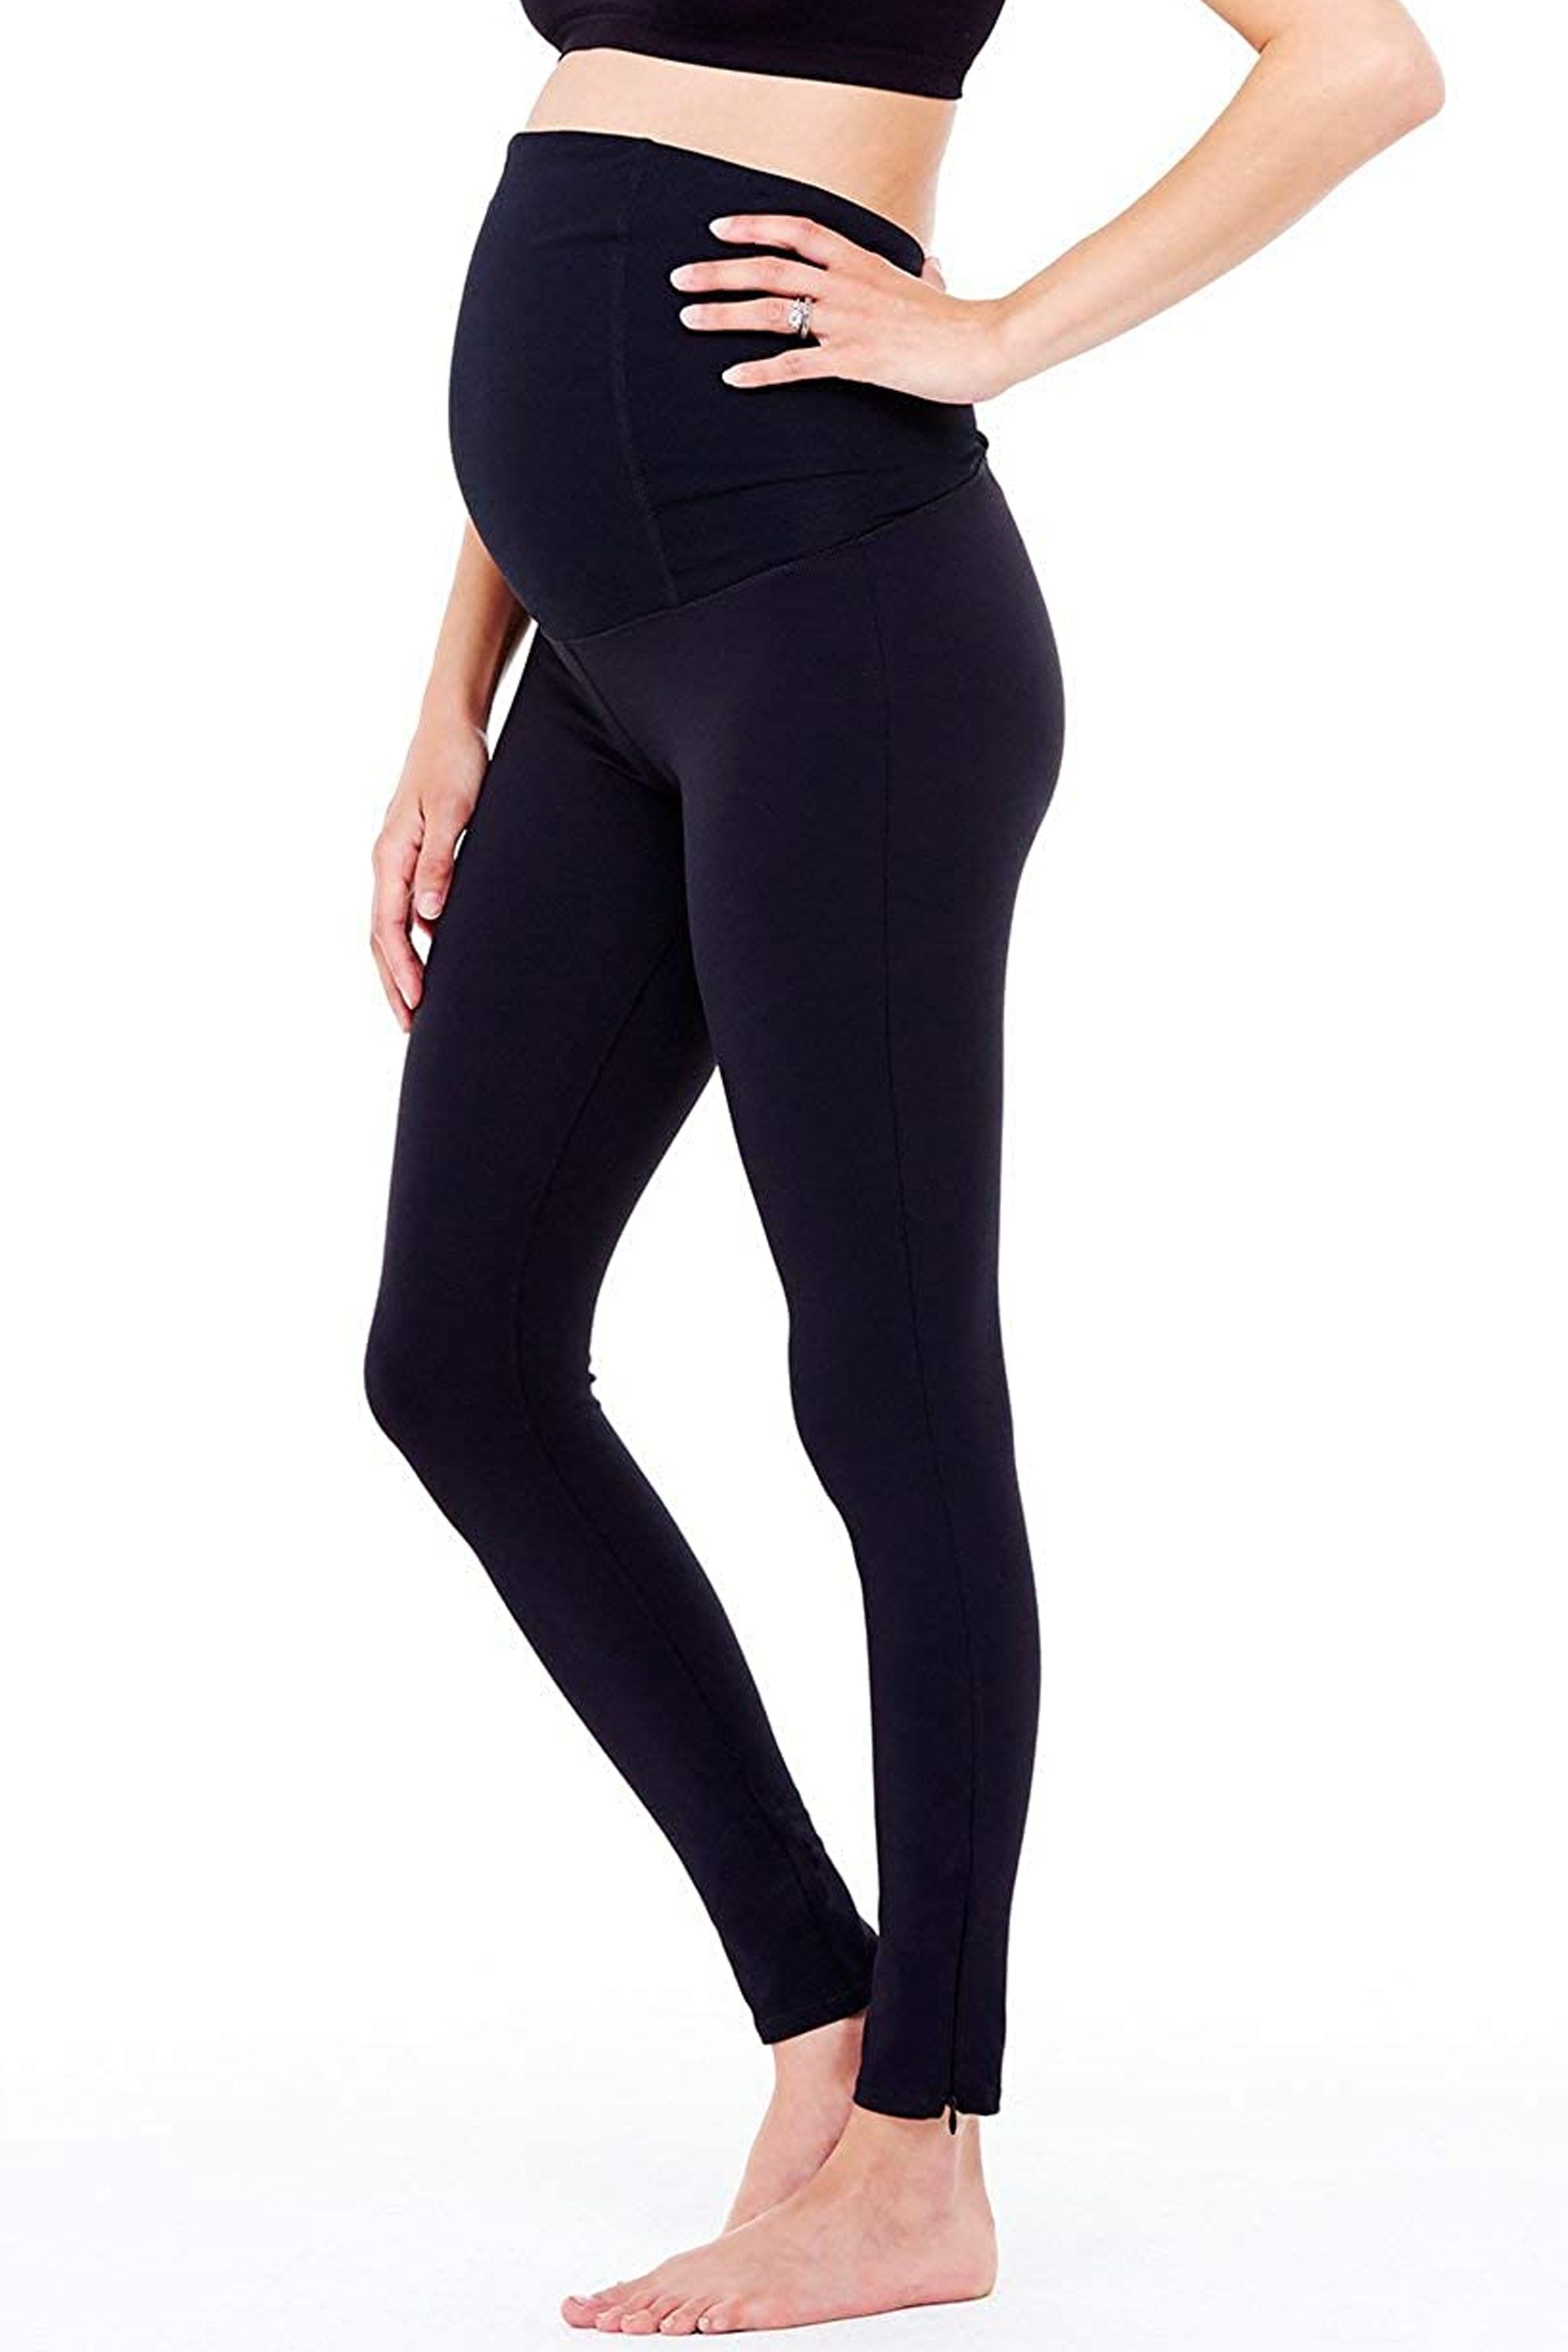 Pregnancy Maternity Leggings Pants for Women with Pockets Comfortable Soft Stretchy Lounge Pregnant Trousers,x06 